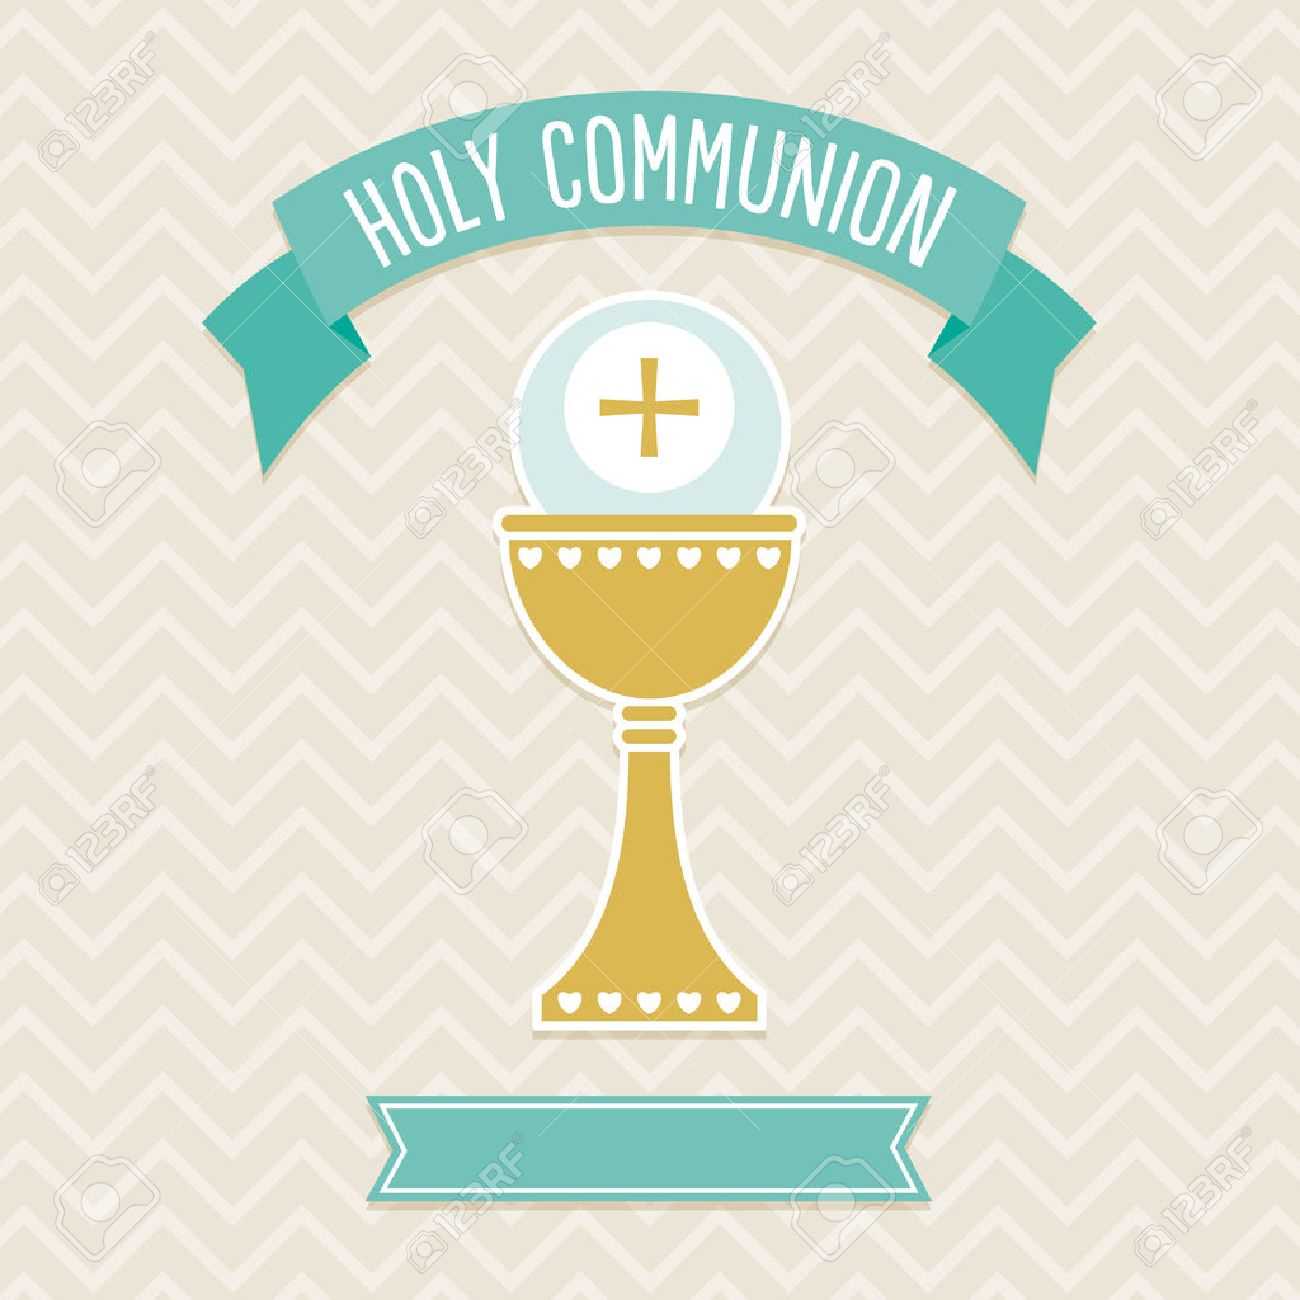 First Holy Communion Card Template In Cream And Aqua With Copy.. With Regard To First Holy Communion Banner Templates